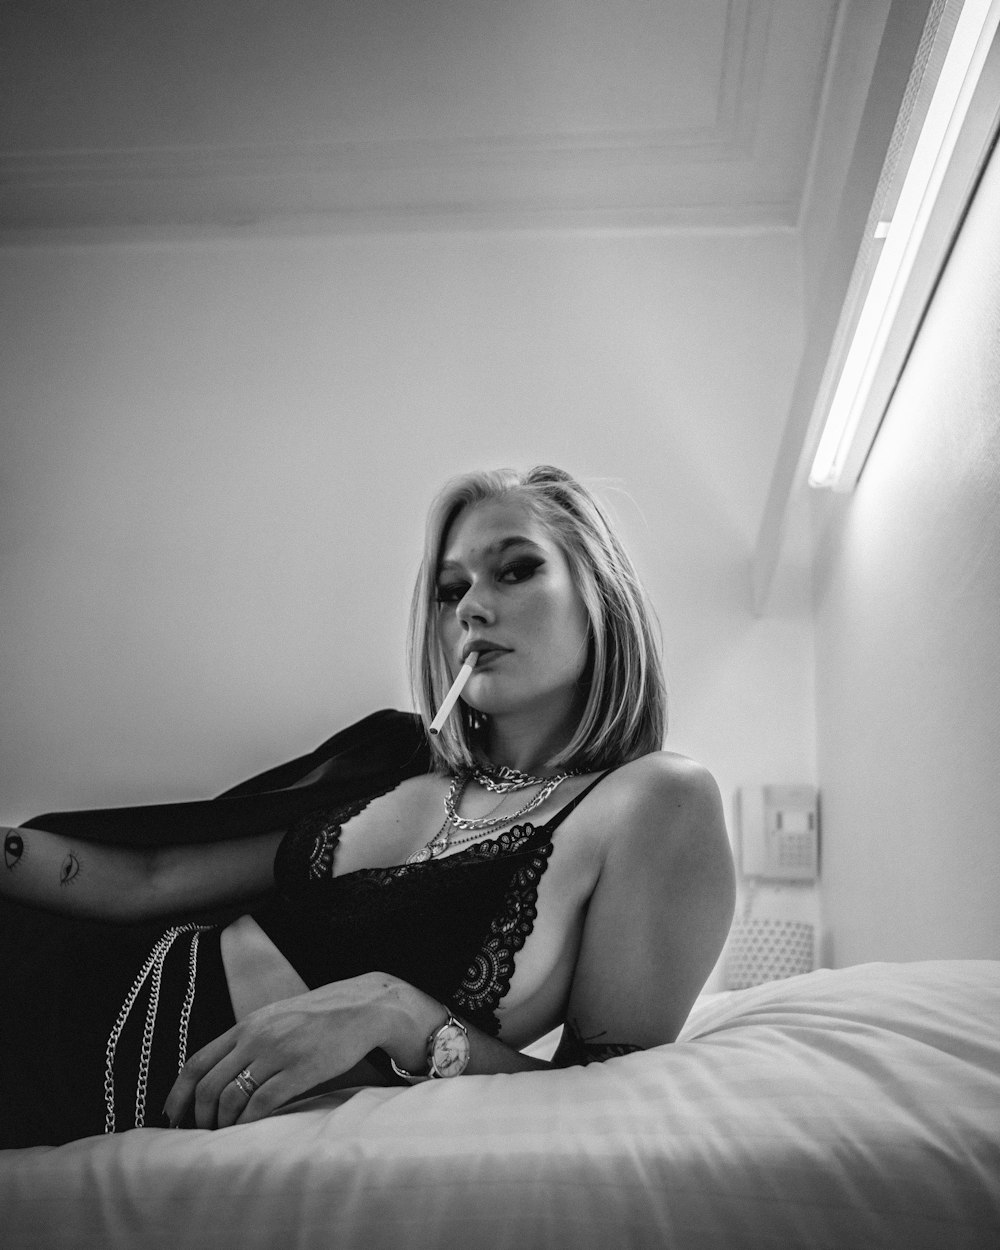 a woman sitting on a bed smoking a cigarette